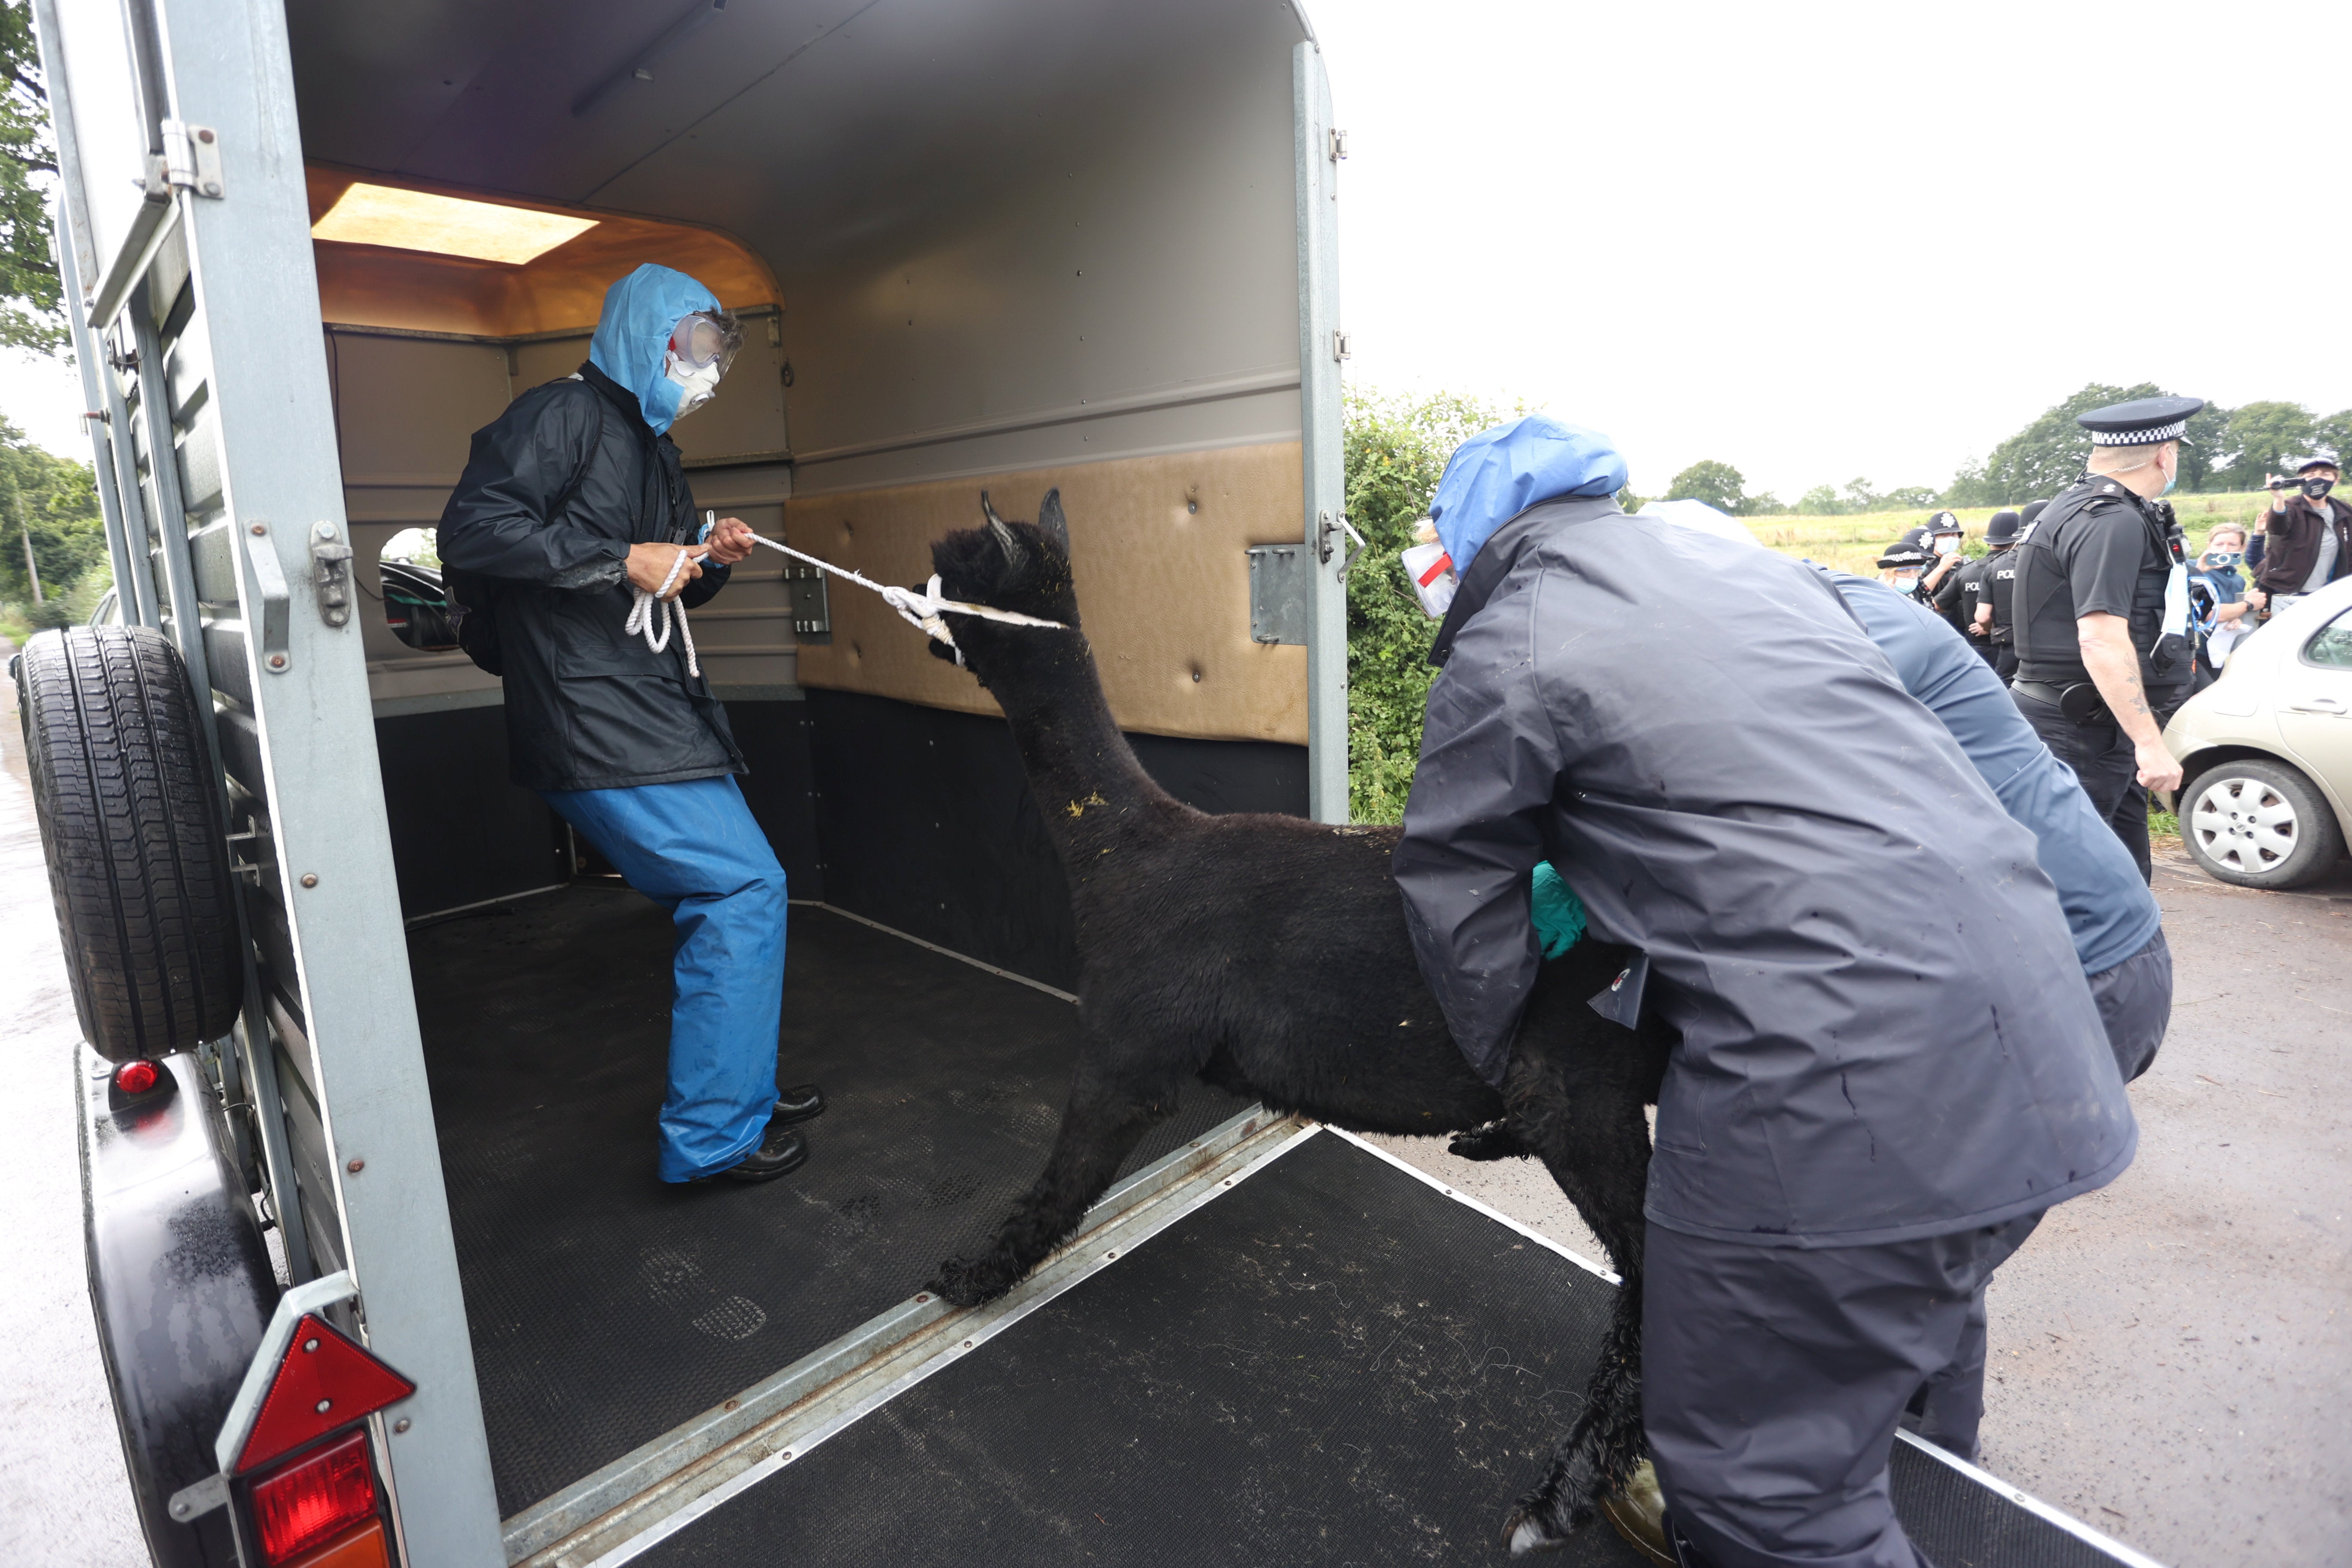 Geronimo is forced into a van this morning by police officers and Defra officials